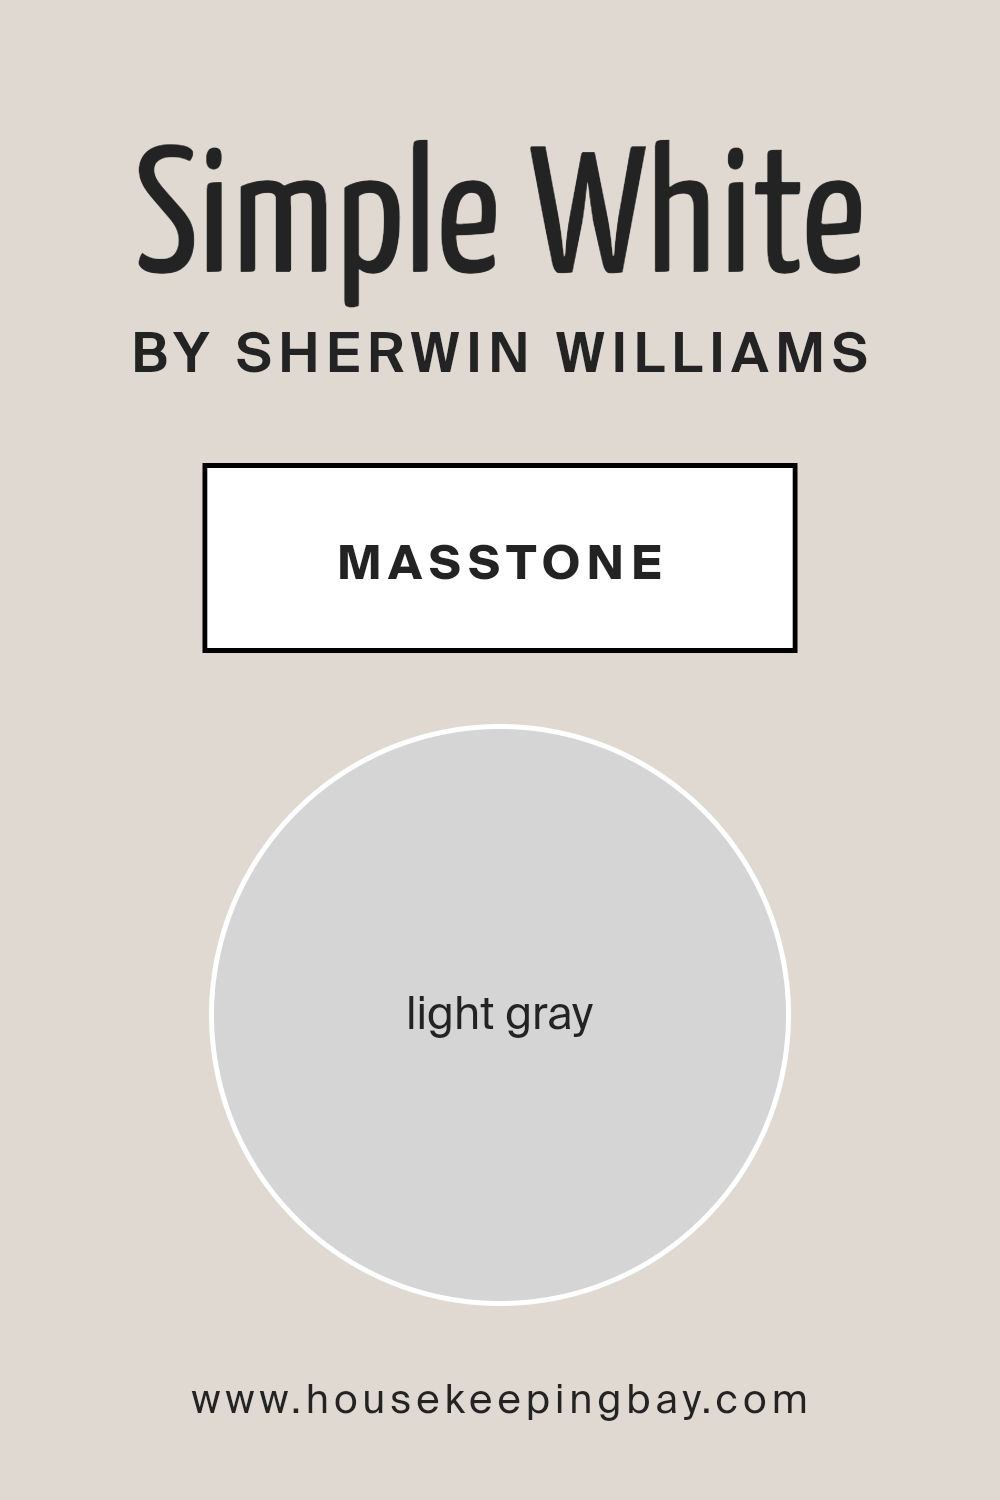 what_is_the_masstone_of_simple_white_sw_7021